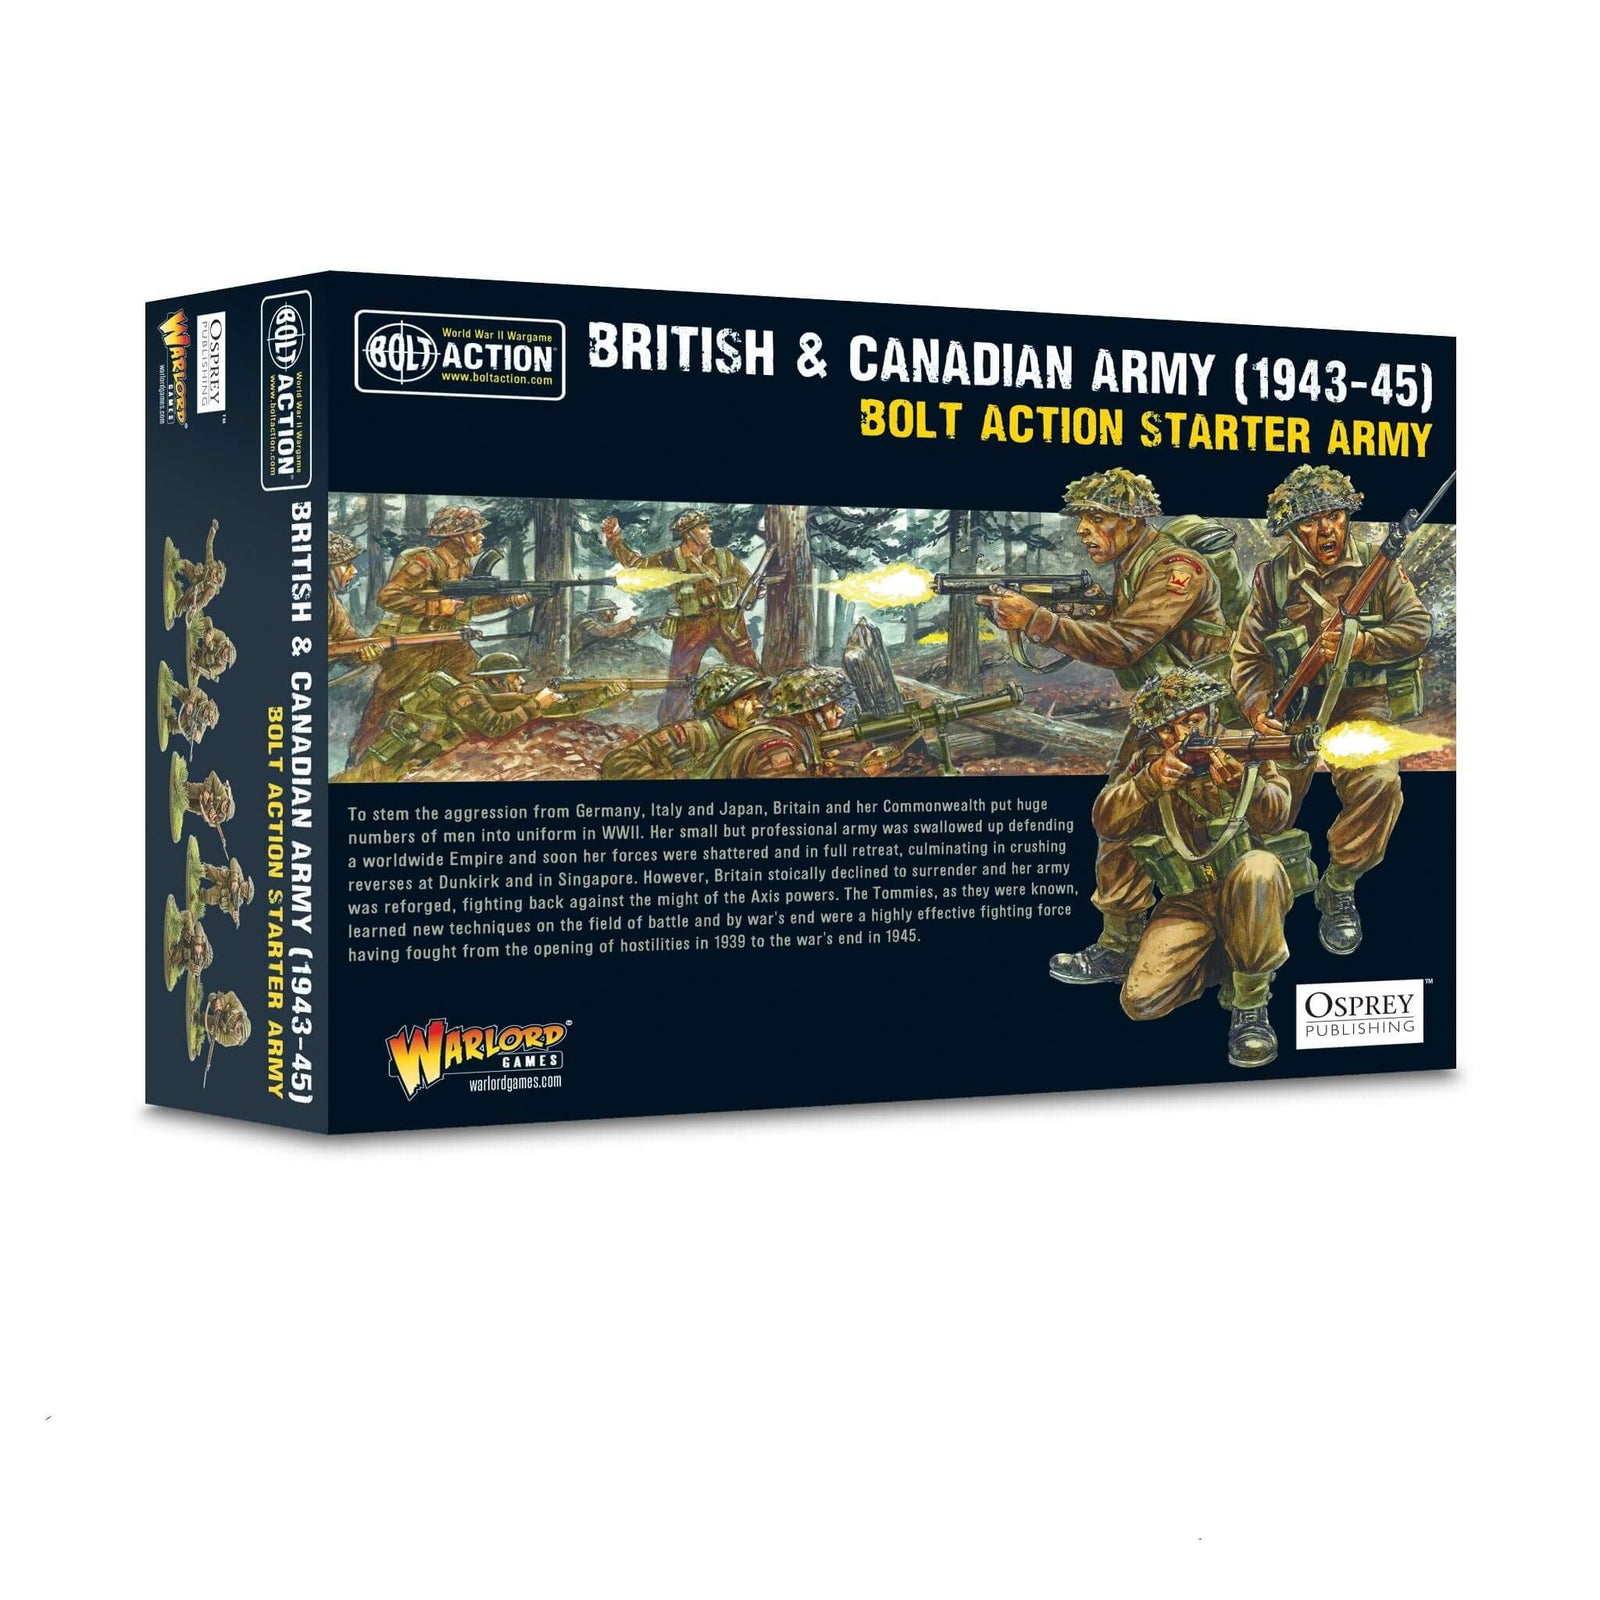 box image for Canadian and british army set